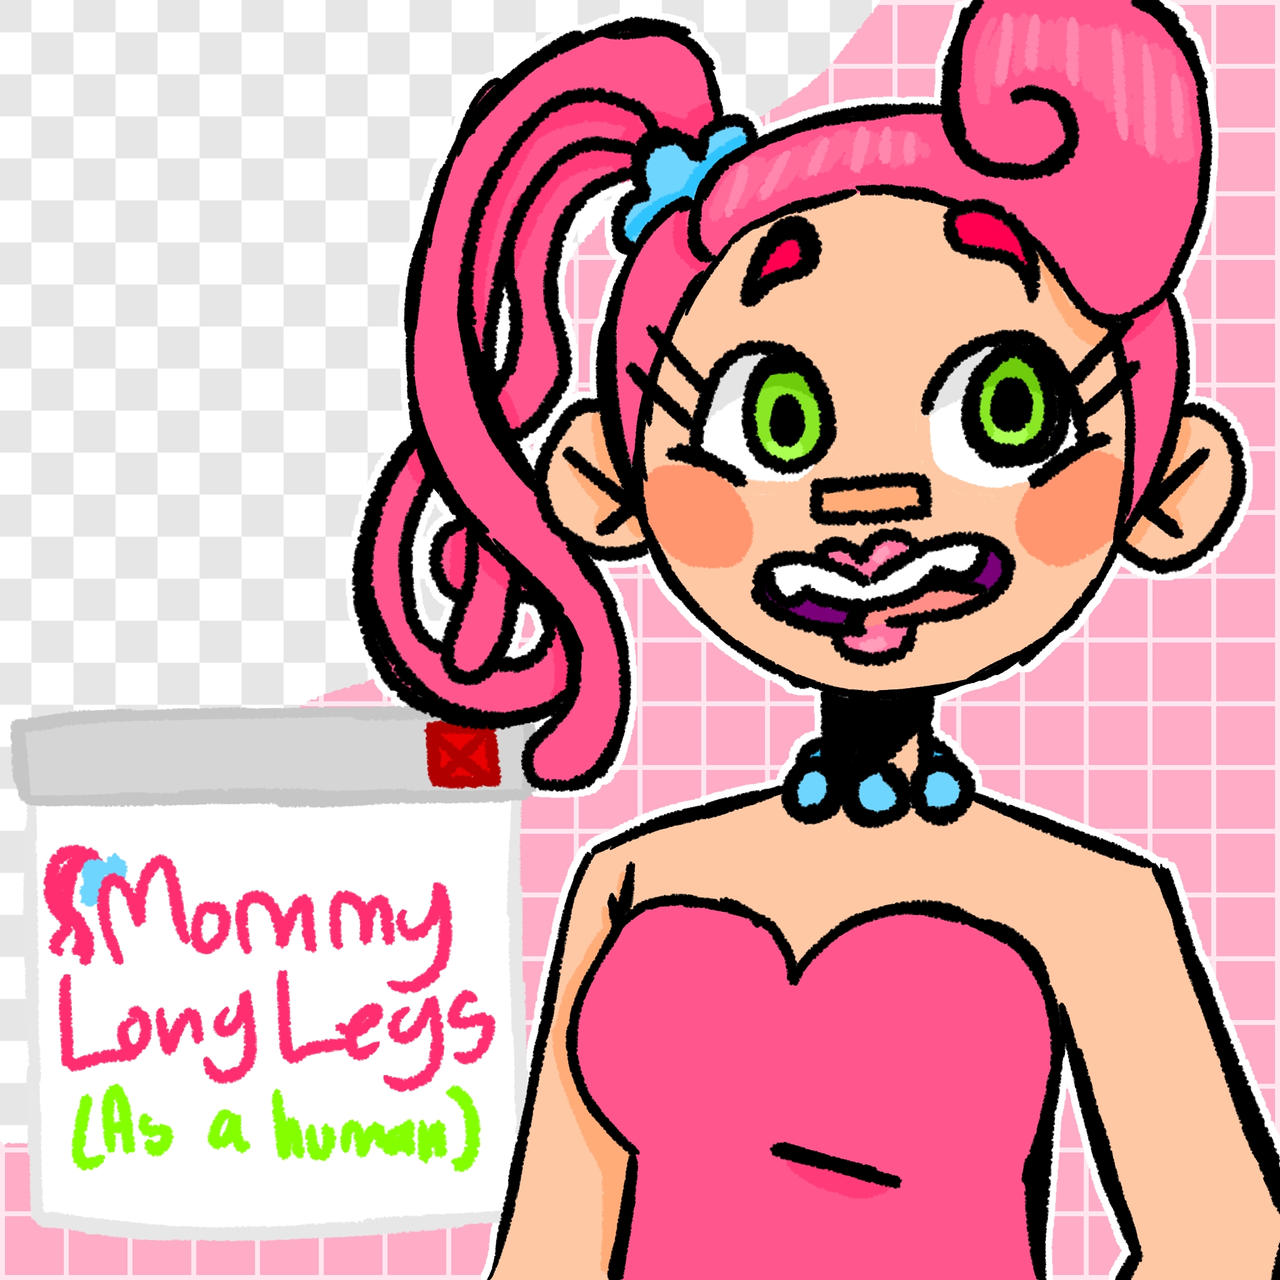 Ask Mommy Long Legs Questions and Answers by MrArtman1999 on DeviantArt